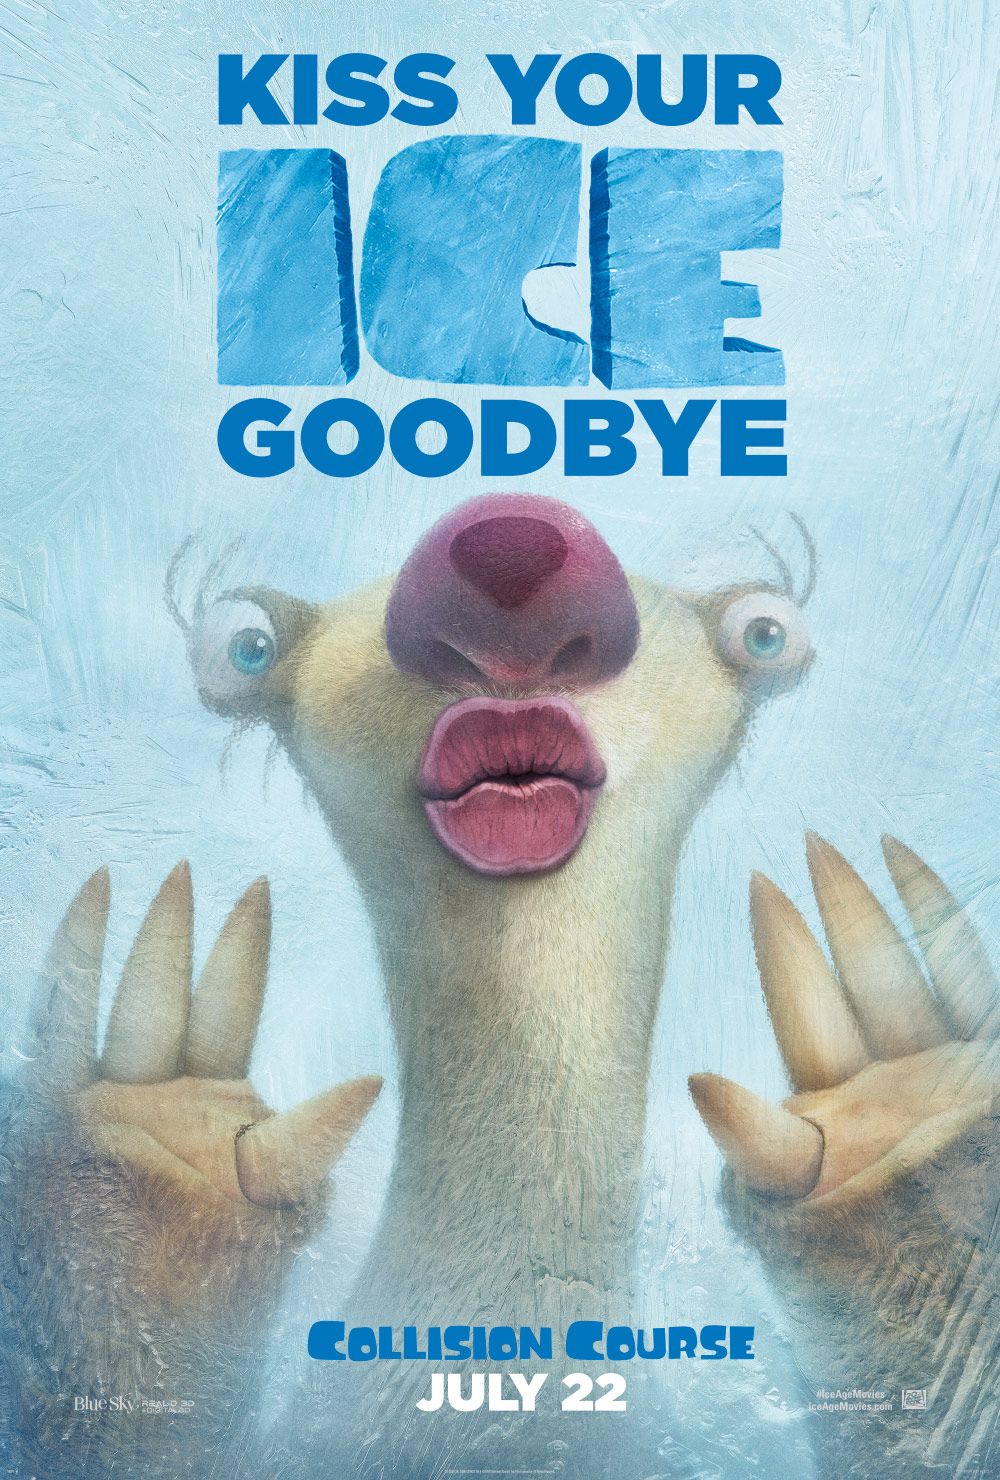 Ice Age Collision Course Poster